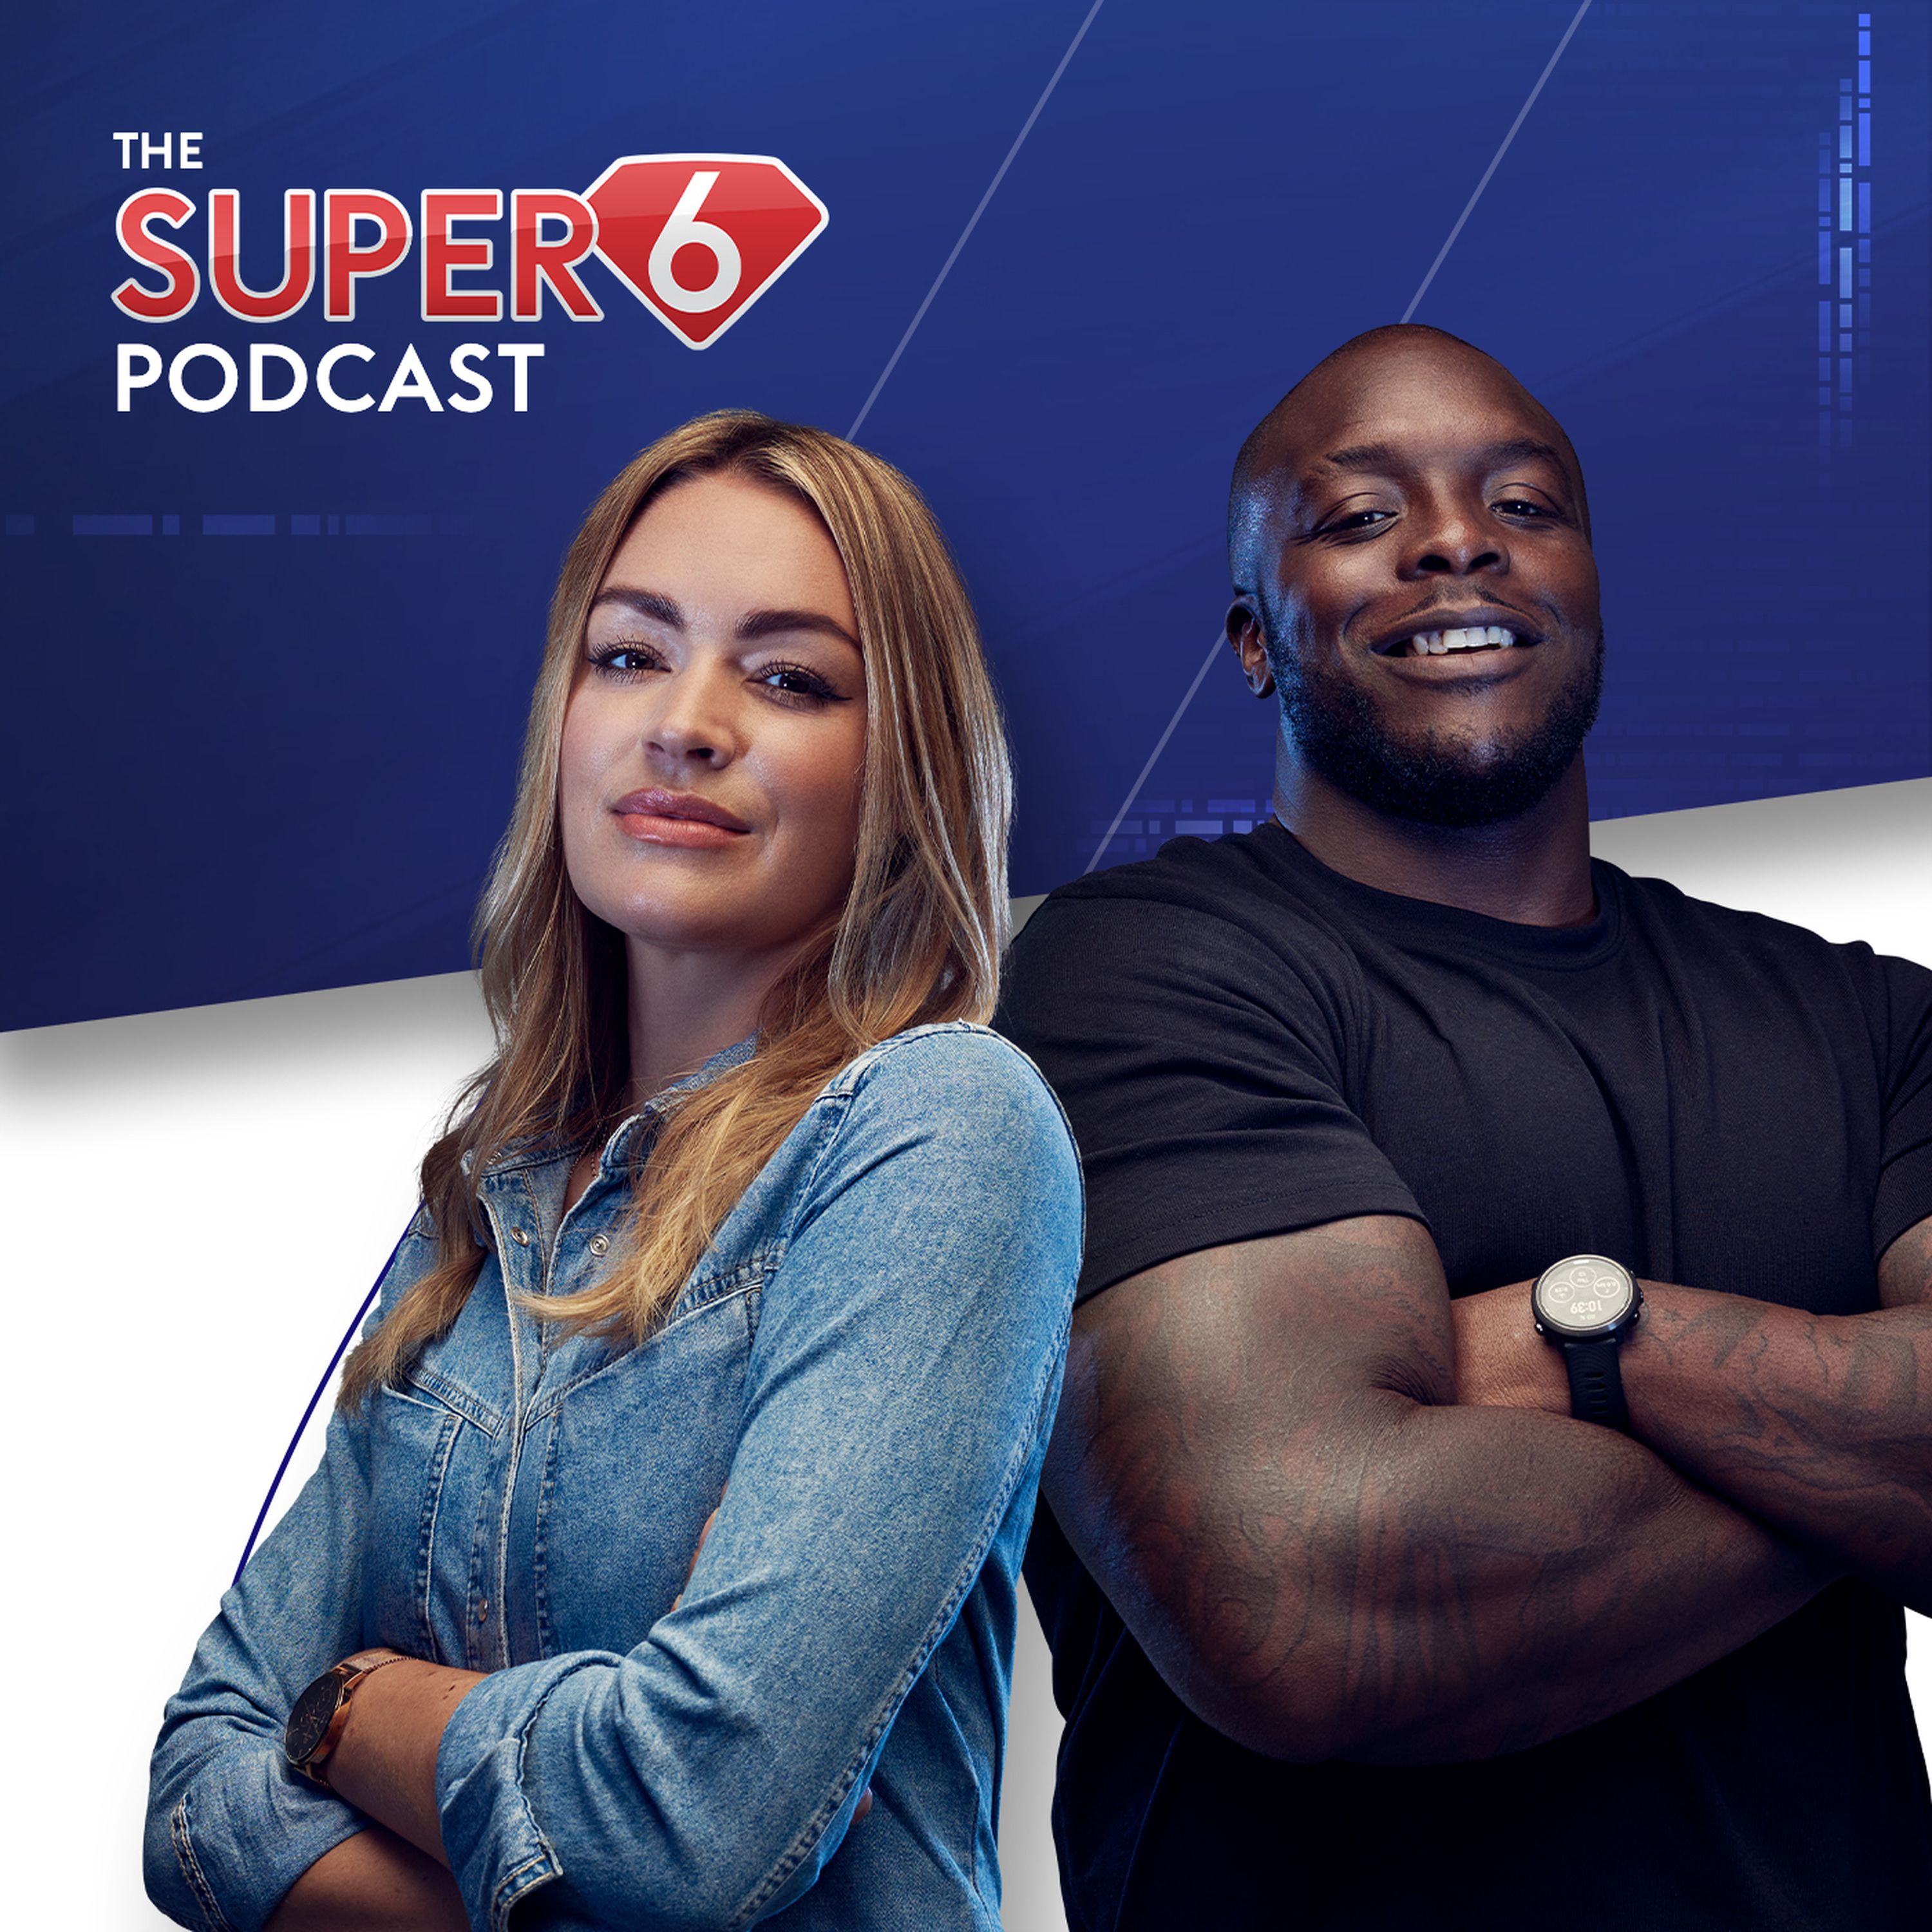 Troy Deeney's crazy journey from prison to the Premier League | The Super 6 Podcast Episode 10